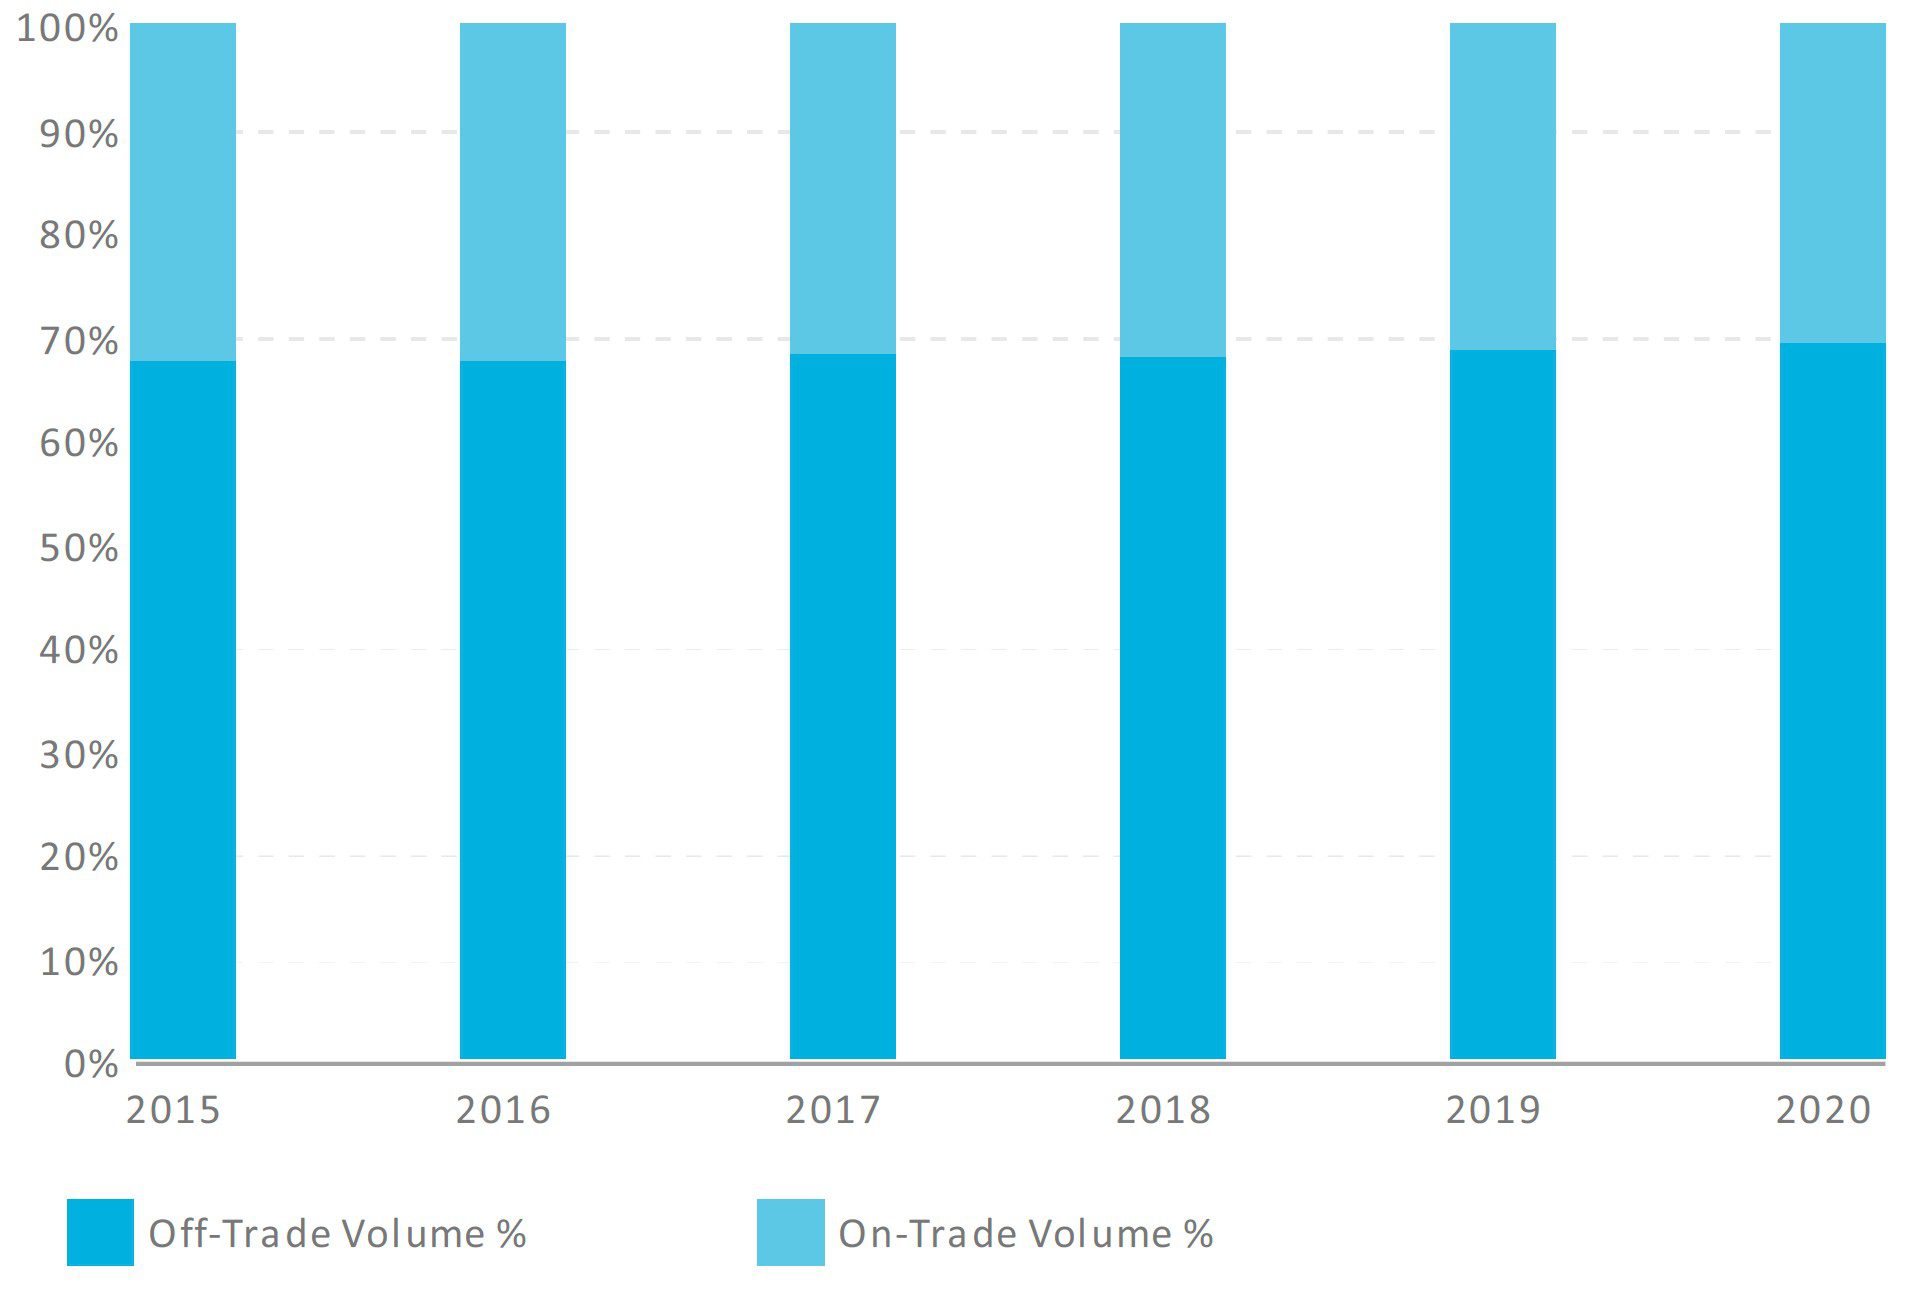 Wine distribution channels off-trade vs. on-trade in China, from 2015 to 2020 (breakdown by volume)